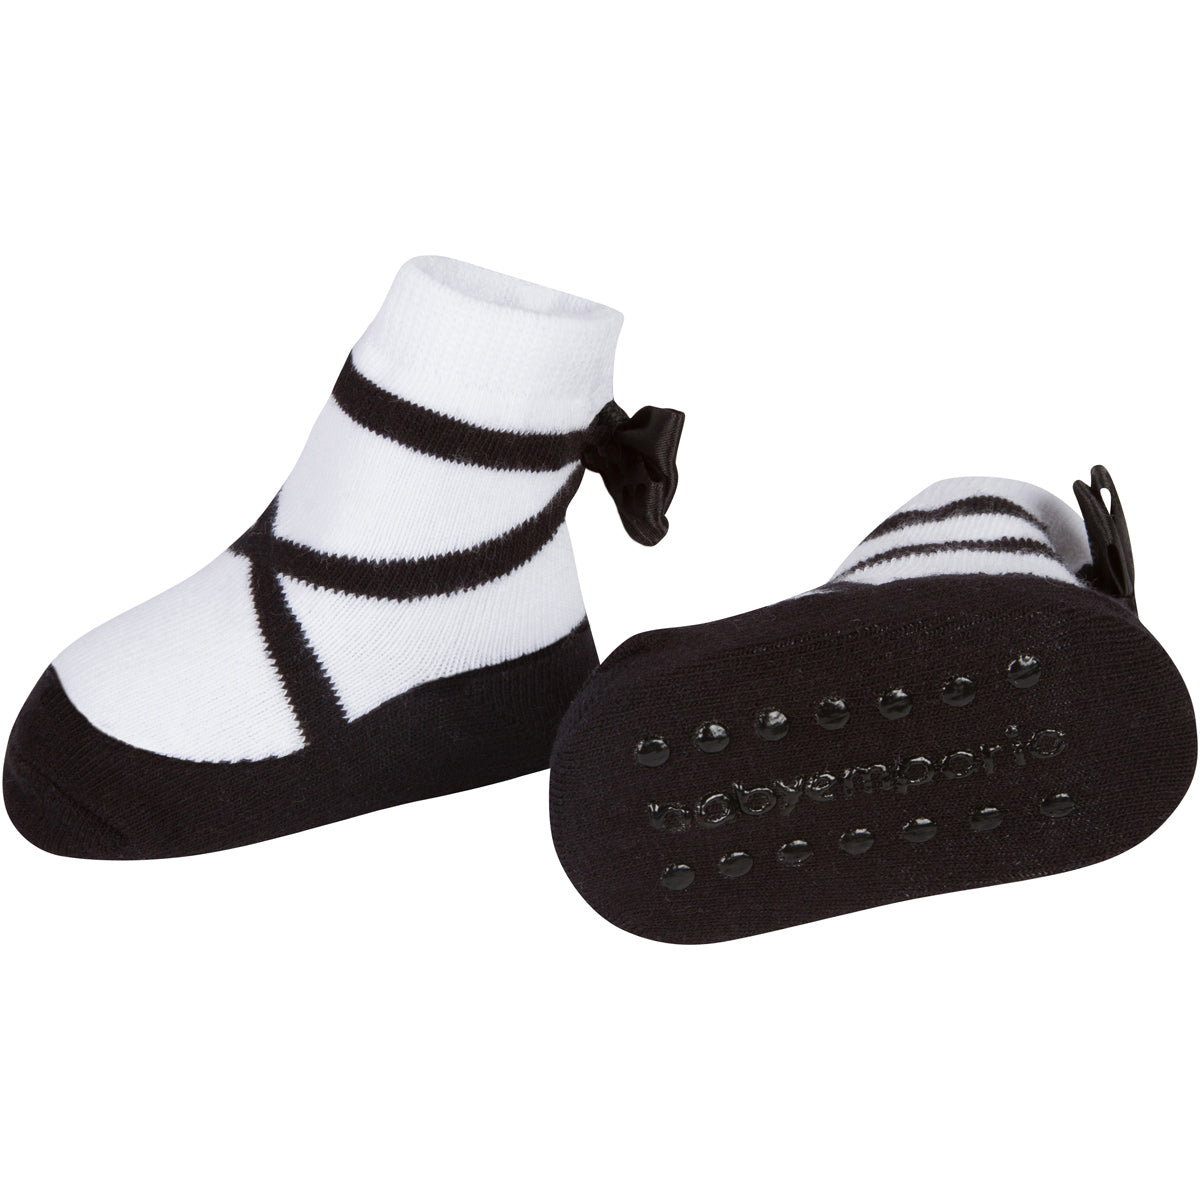  Baby Emporio toddler girl ballerina socks with nearly invisible anti-slip soles matching the socks black sole color